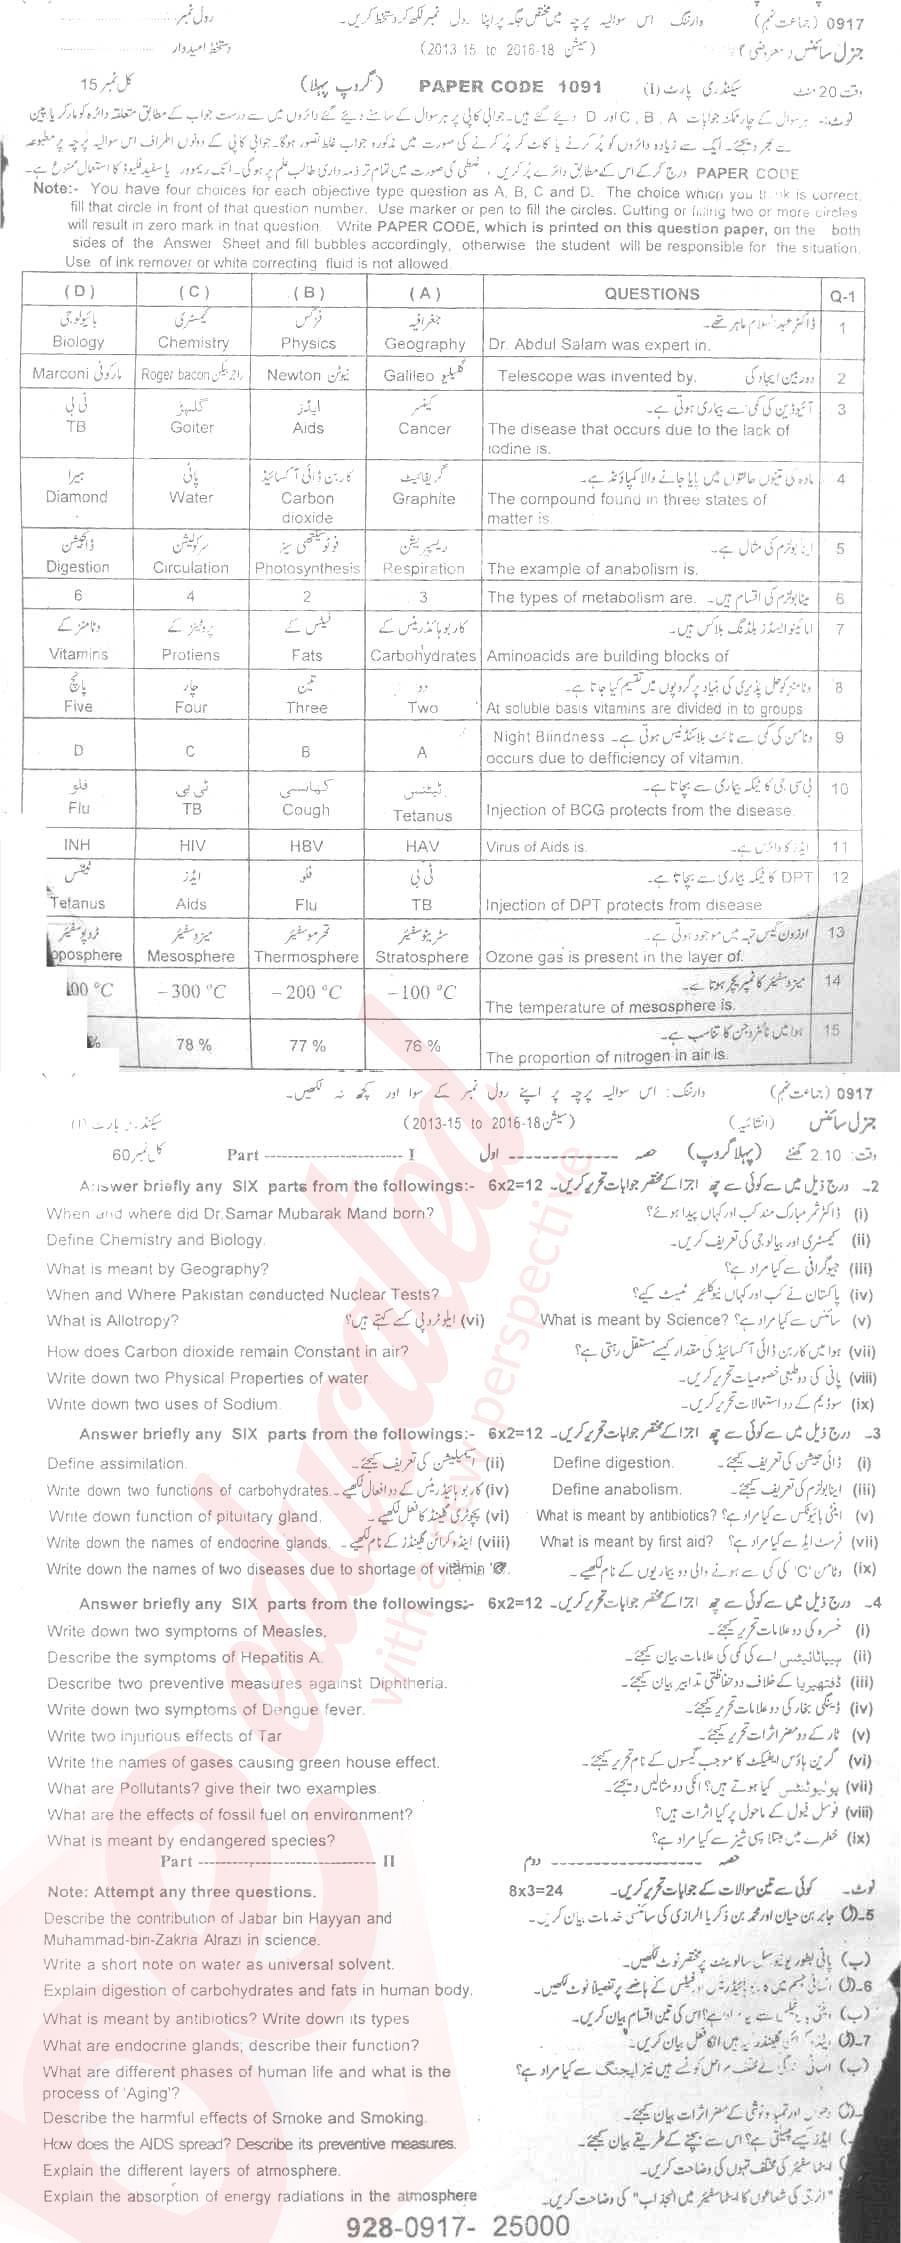 General Science 9th class Past Paper Group 1 BISE Sargodha 2017